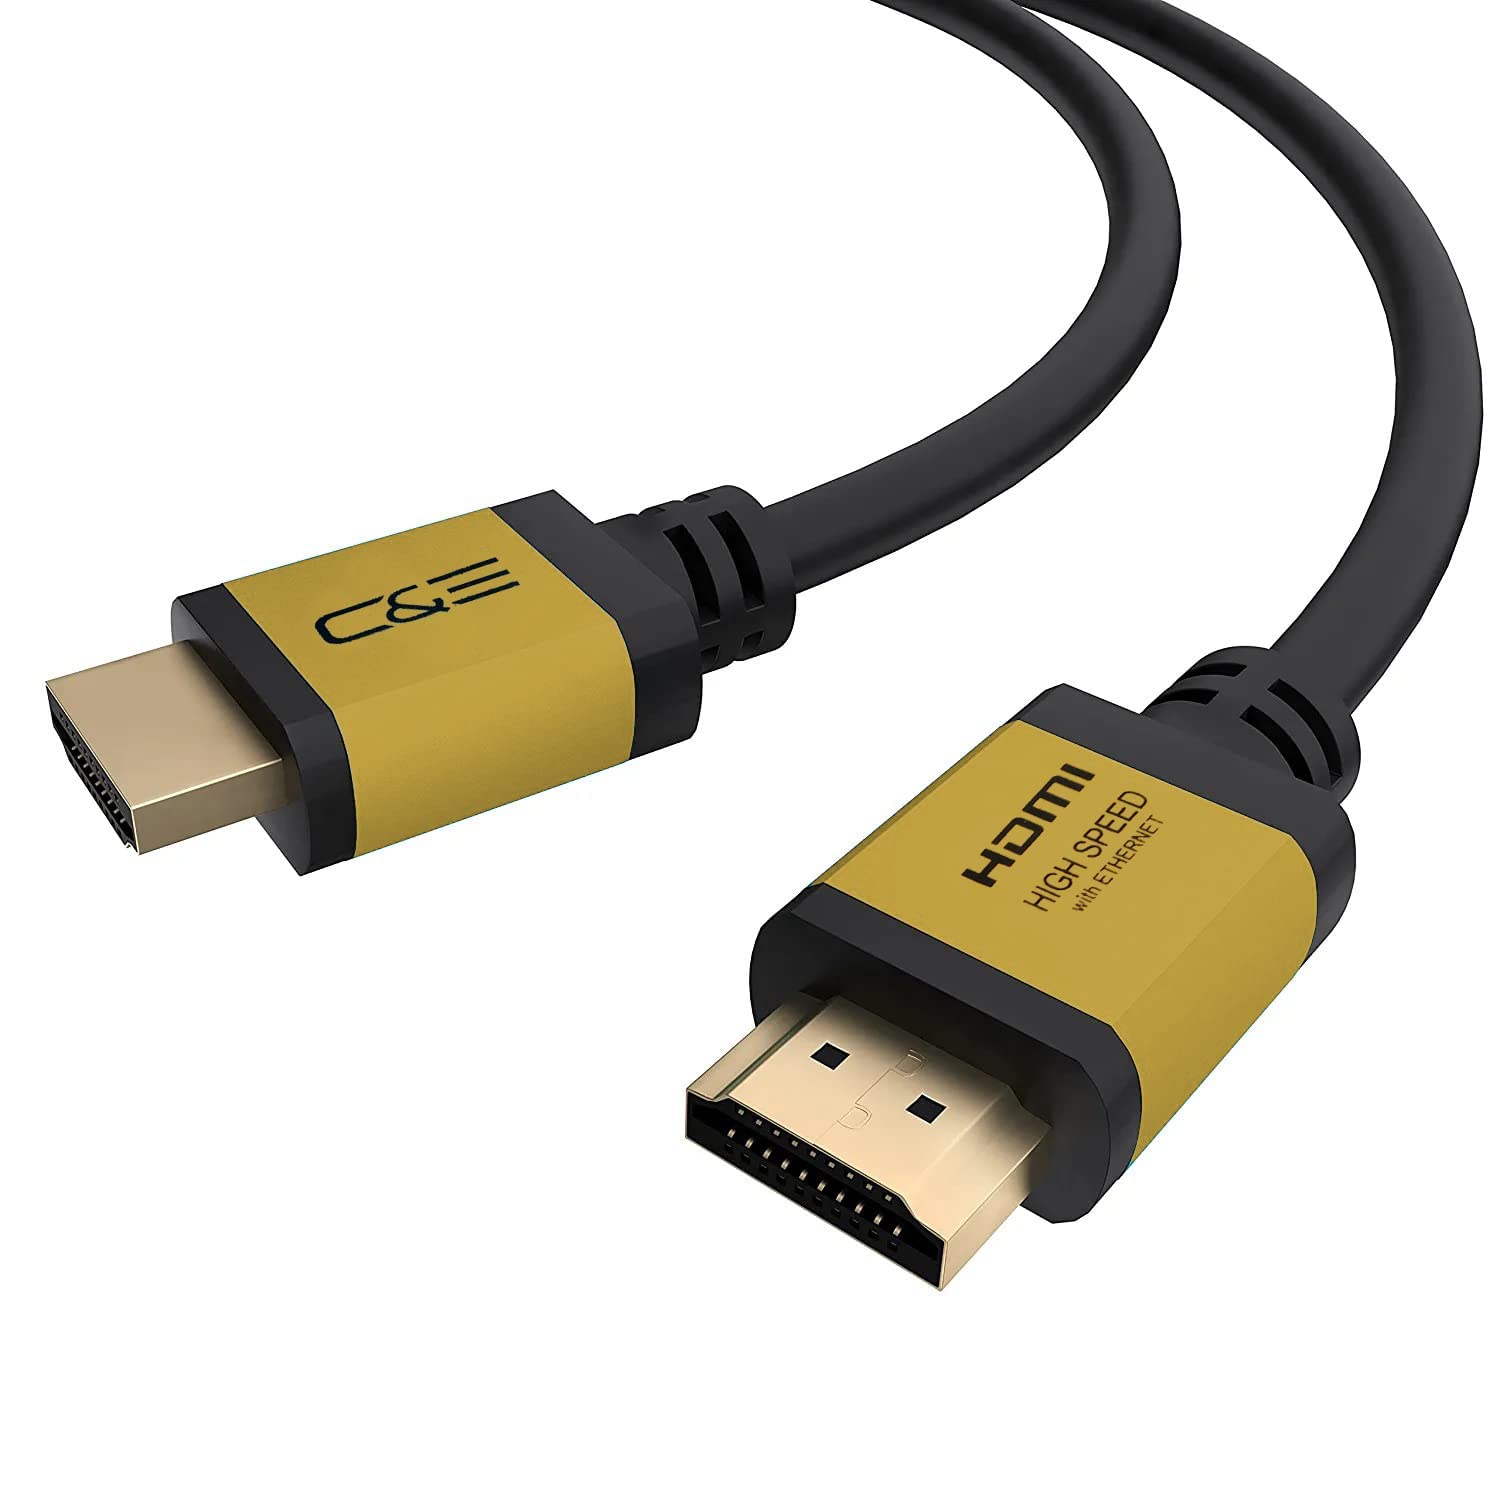 Ensure that the HDMI cable is securely plugged in at both ends (console and TV).
If possible, try using a different HDMI cable to eliminate the possibility of a faulty cable.